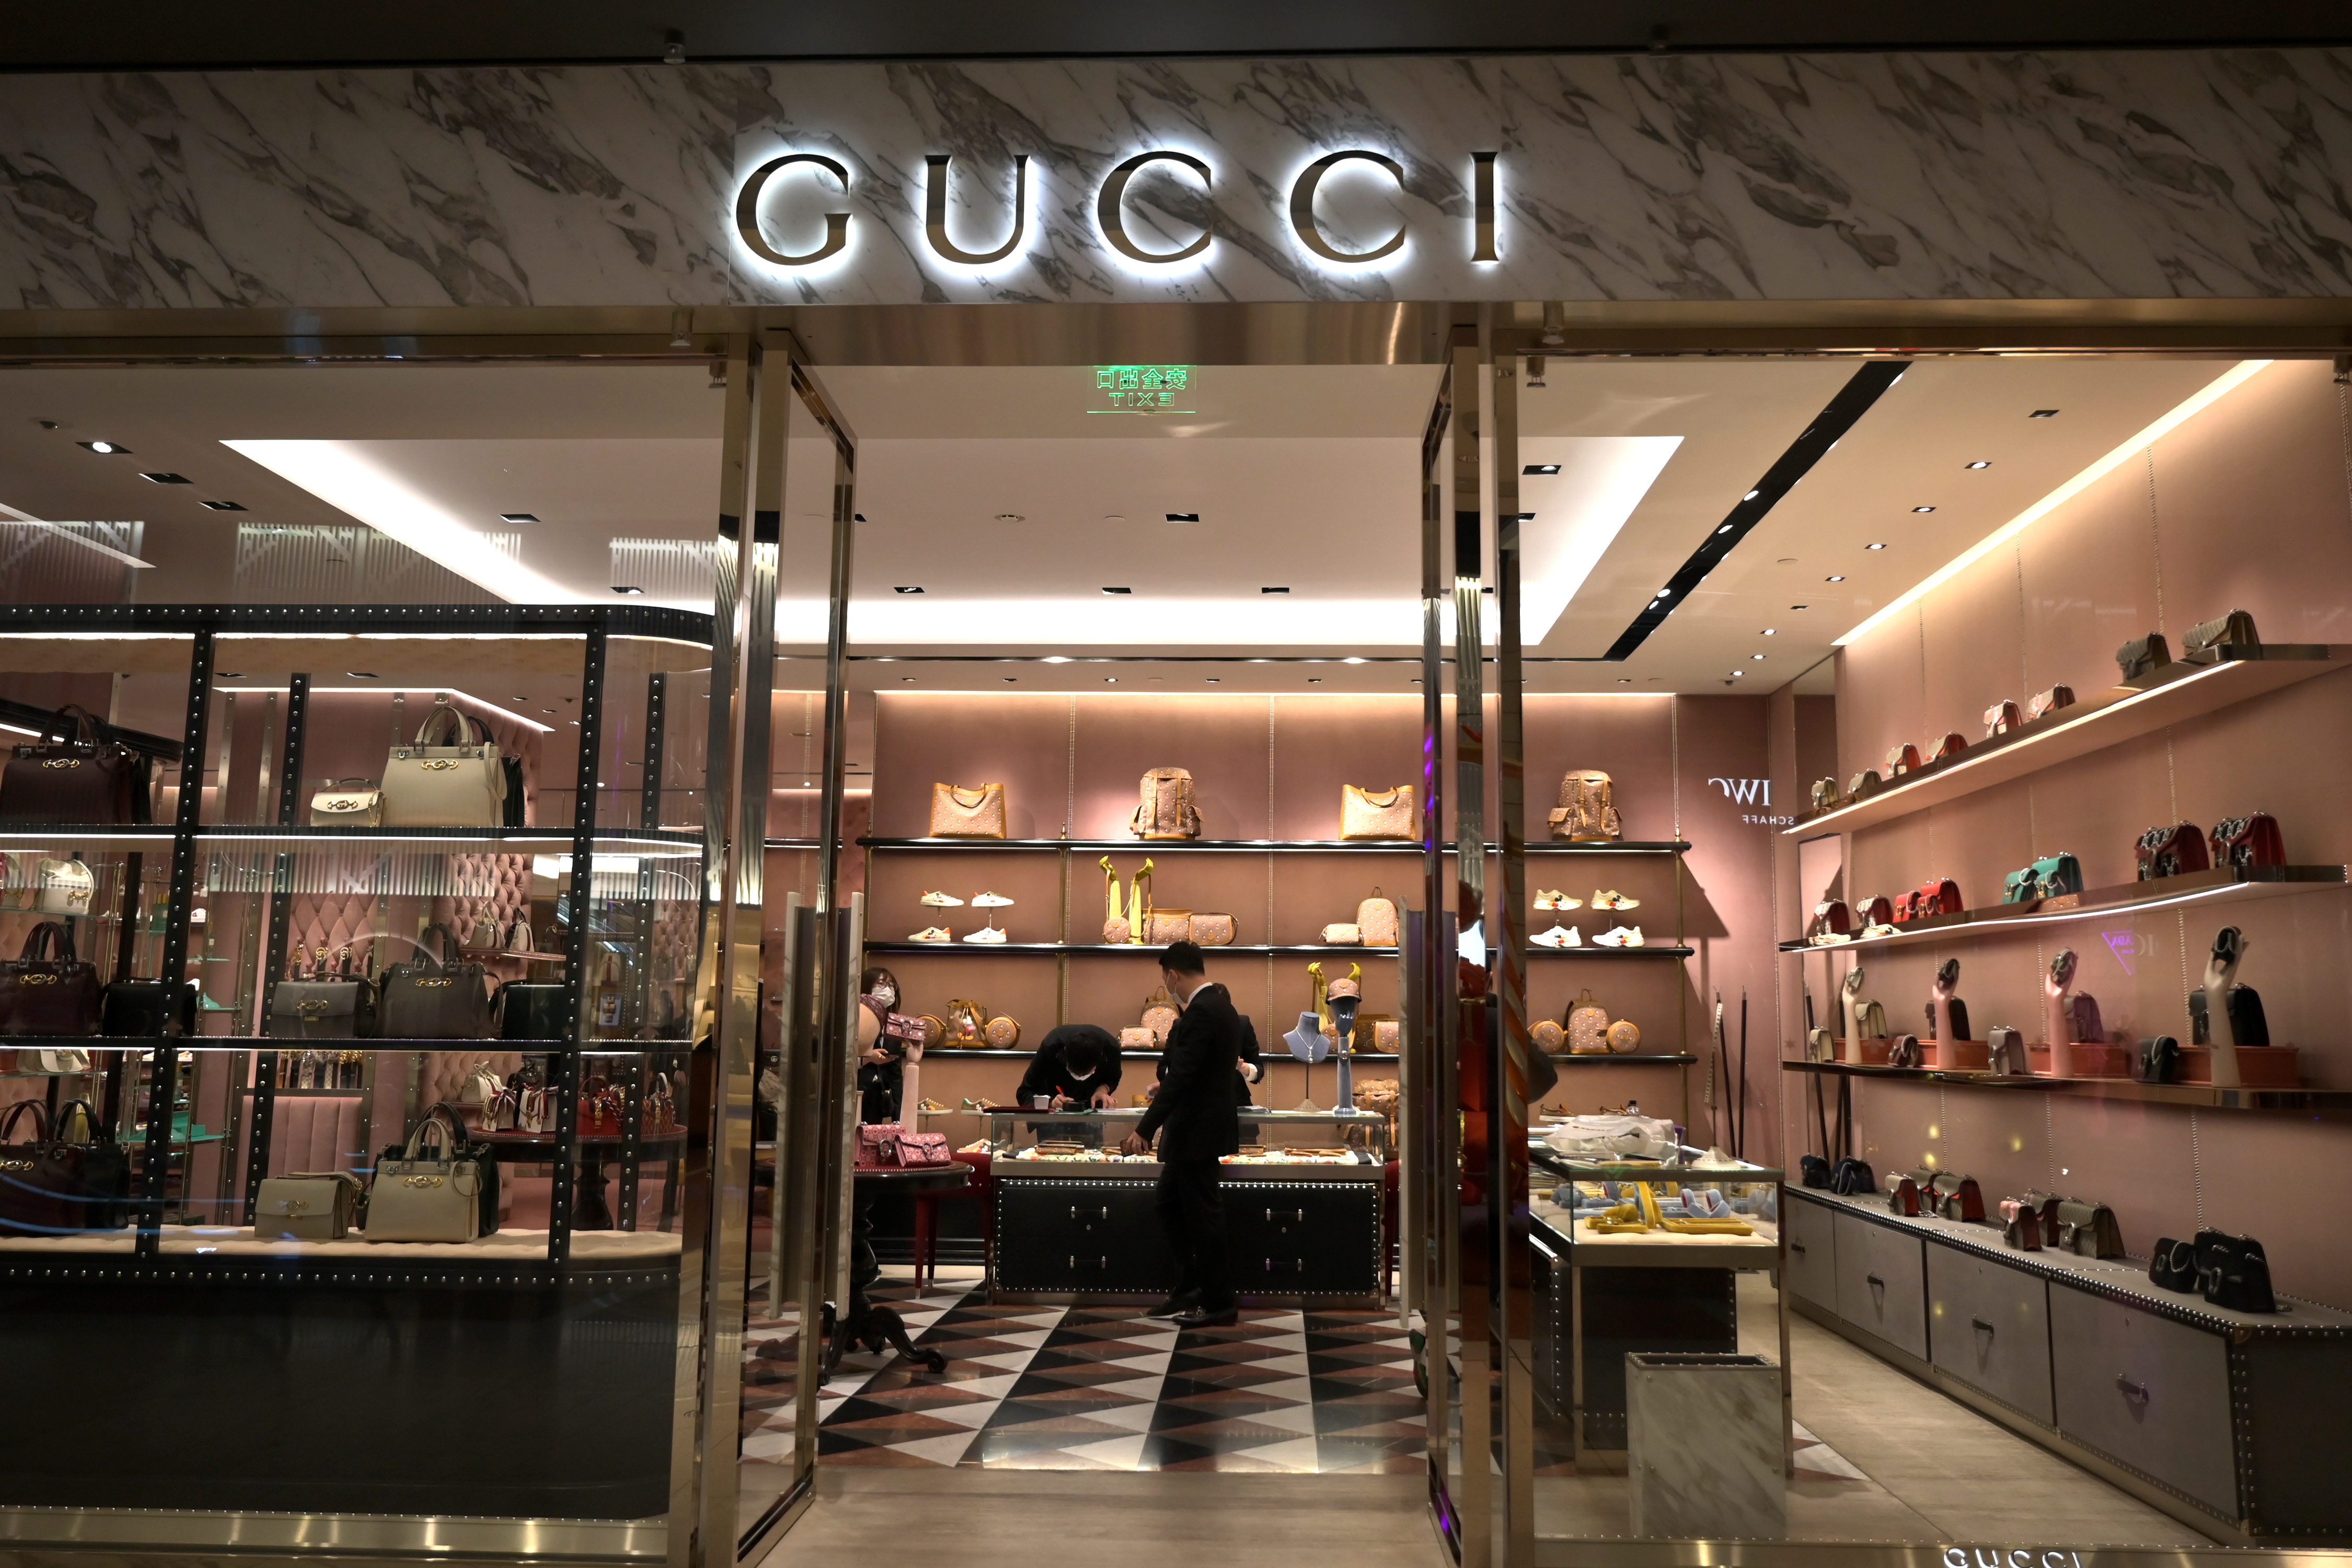 We need to talk about Gucci: Kering sets plan to boost brand in China |  Reuters